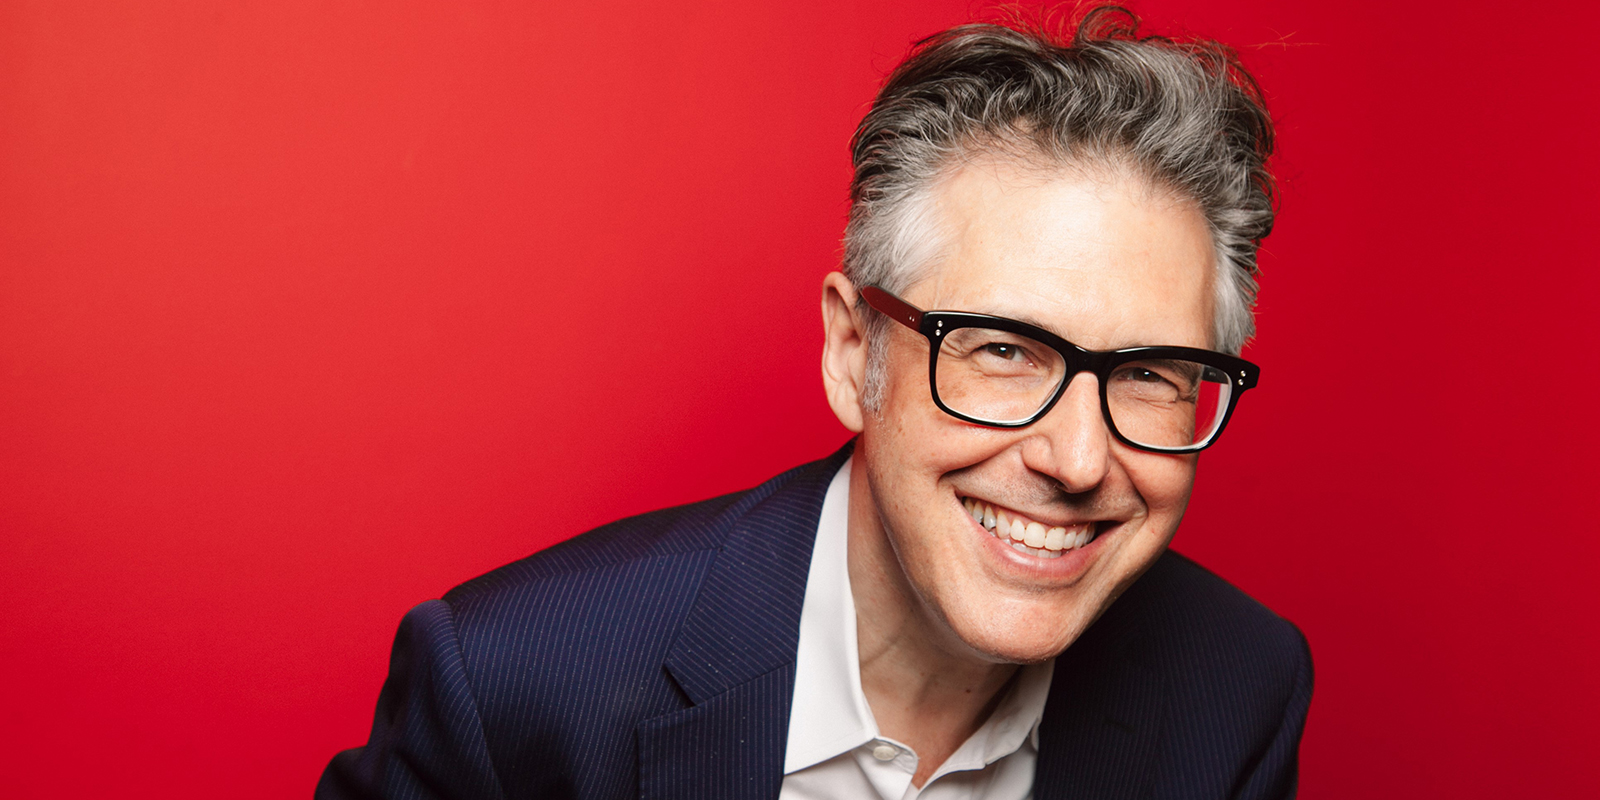 Seven Things I’ve LearnedAn Afternoon with Ira Glass